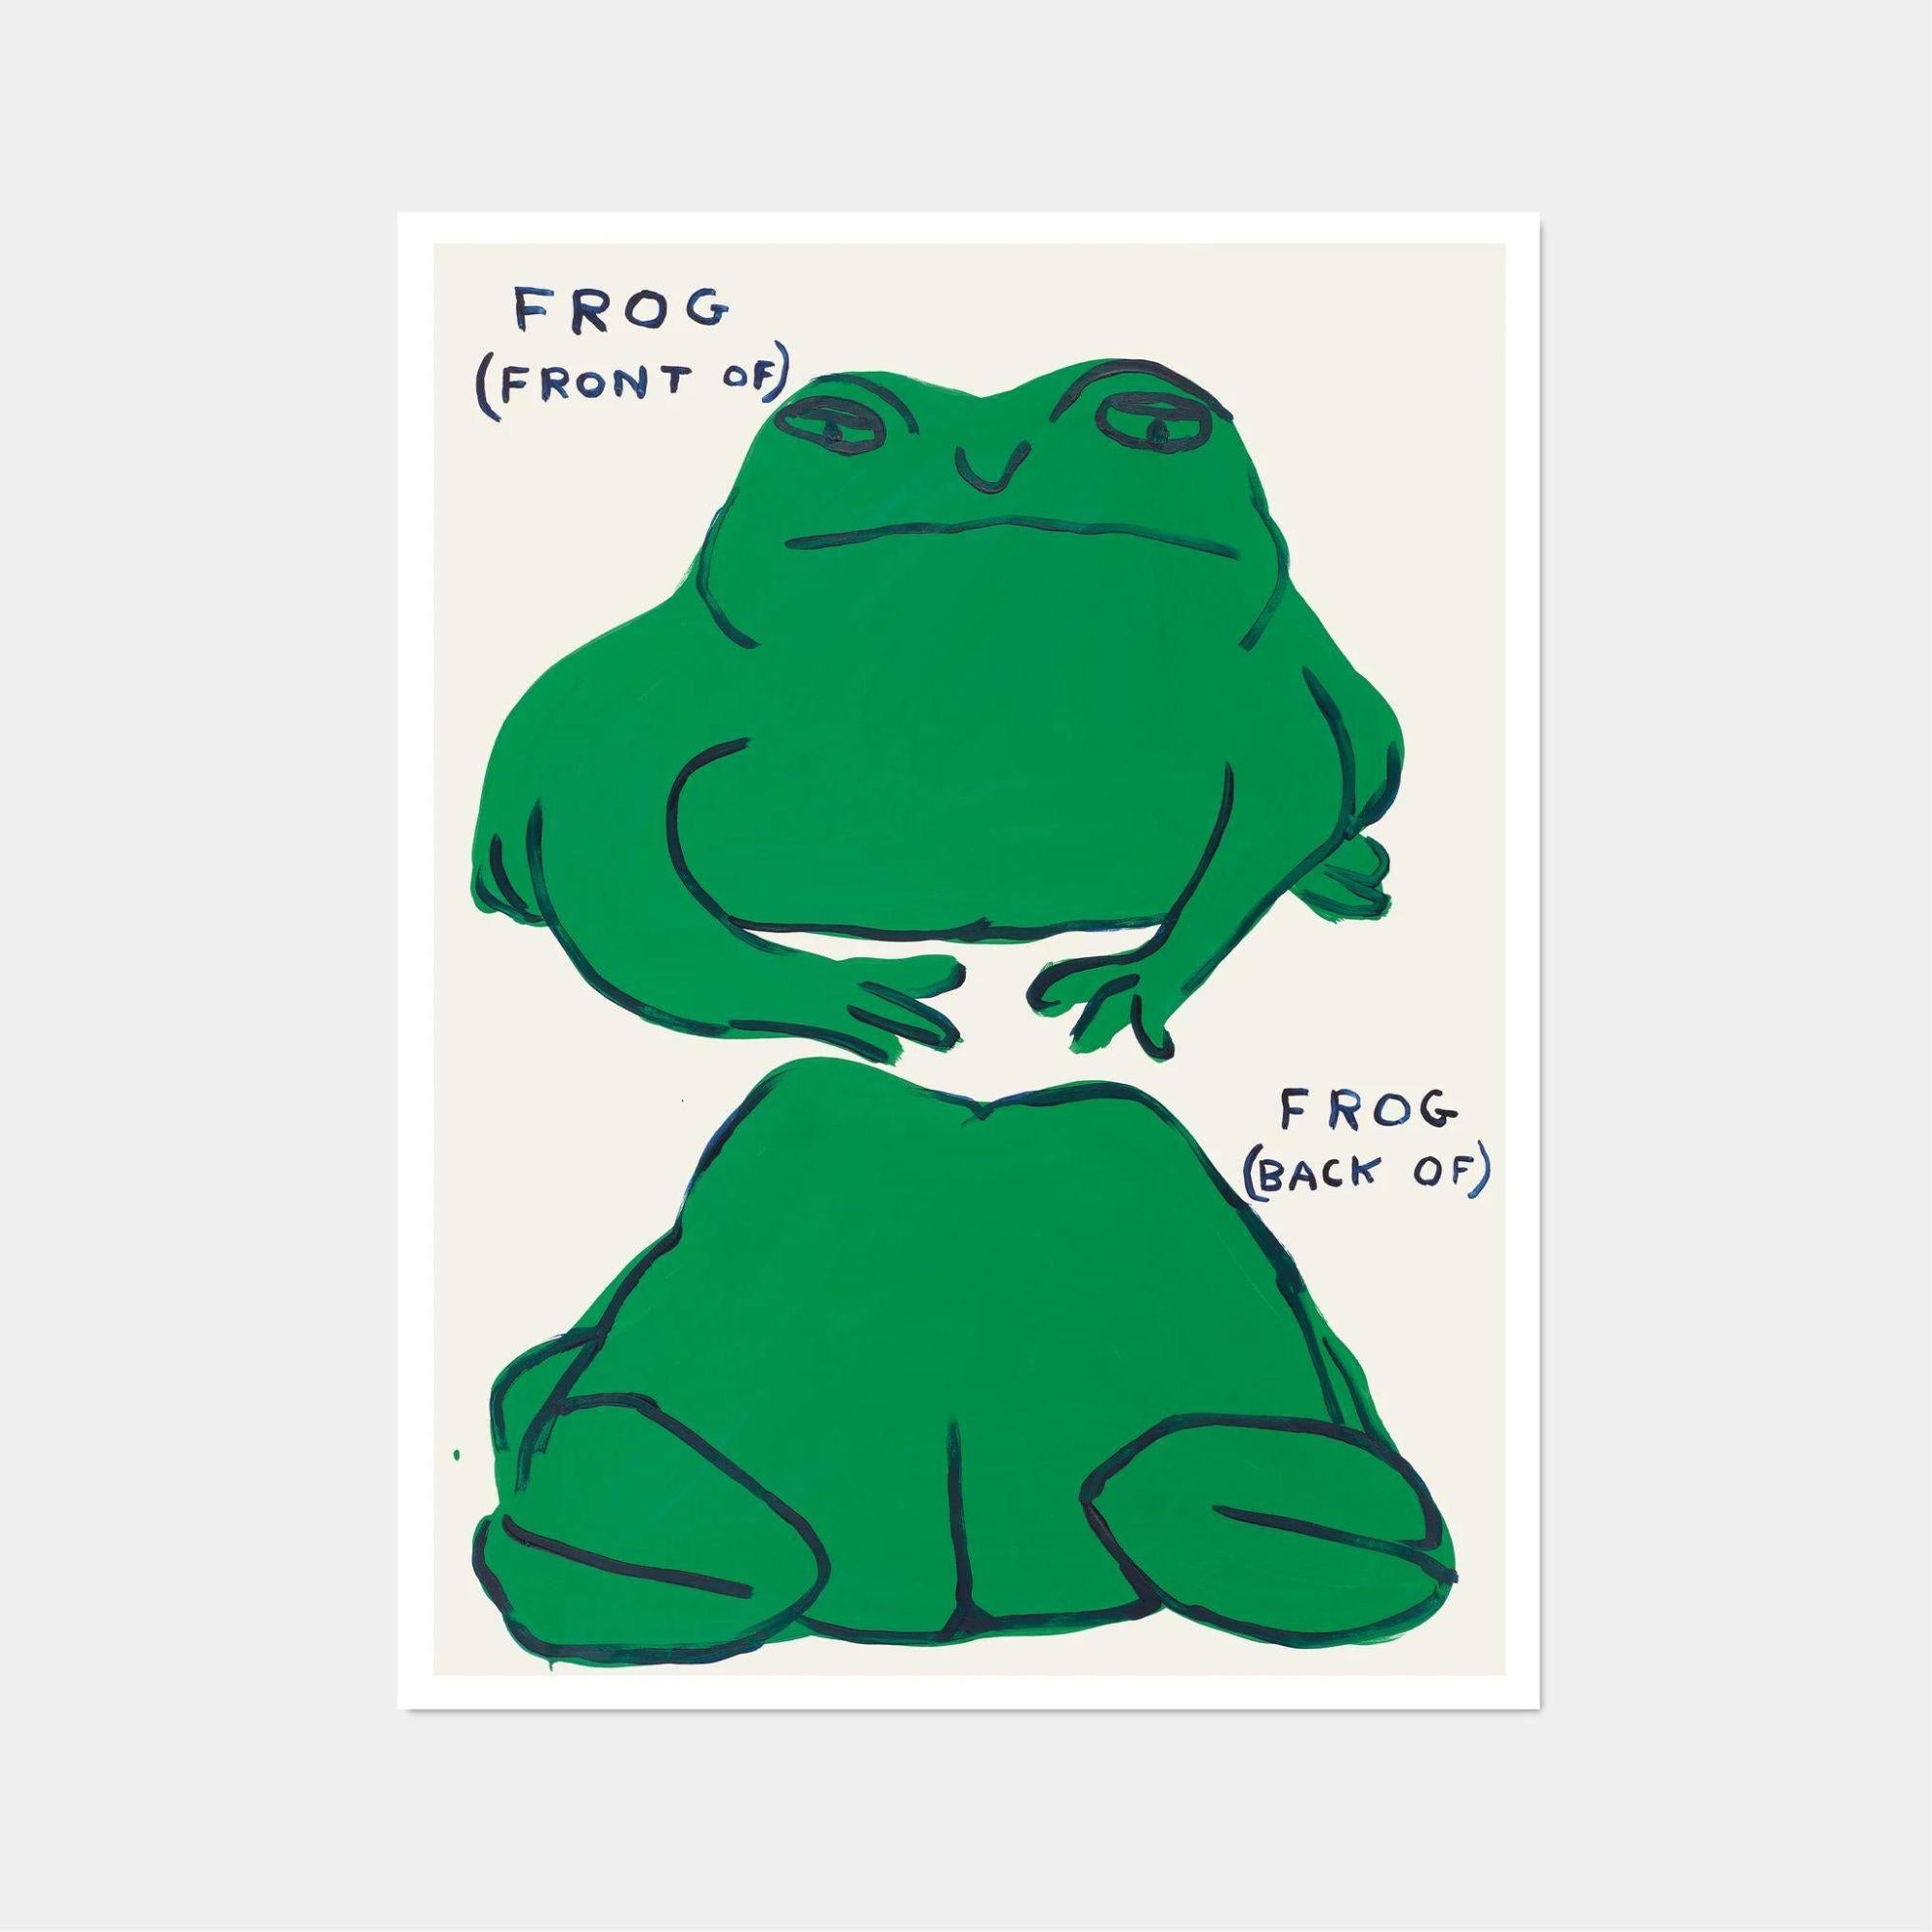 David Shrigley, Frog (front of), Frog (back of), 2021

60 x 80 cm

Off-set lithography

Printed on 200g Munken Lynx paper

Narayana Press in Denmark


British artist David Shrigley is best known for his distinctive drawing style and works that make